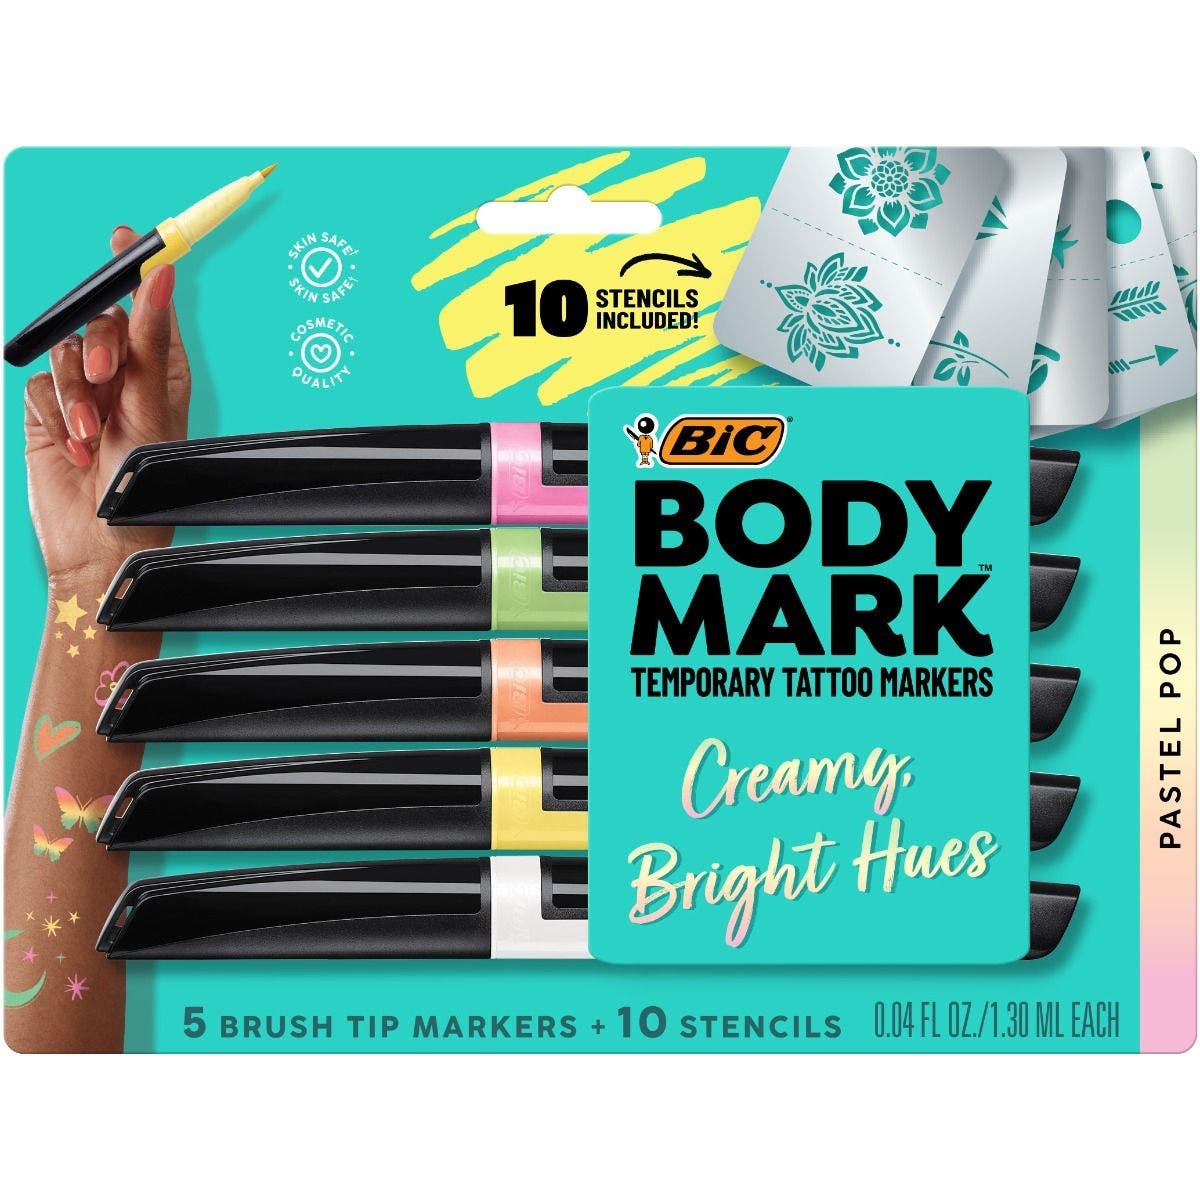 BODYMARK Temporary Tattoo Markers for Skin, Pride Pack, Flexible Brush Tip,  11-Count Pack of Assorted Colors Plus Stencils 